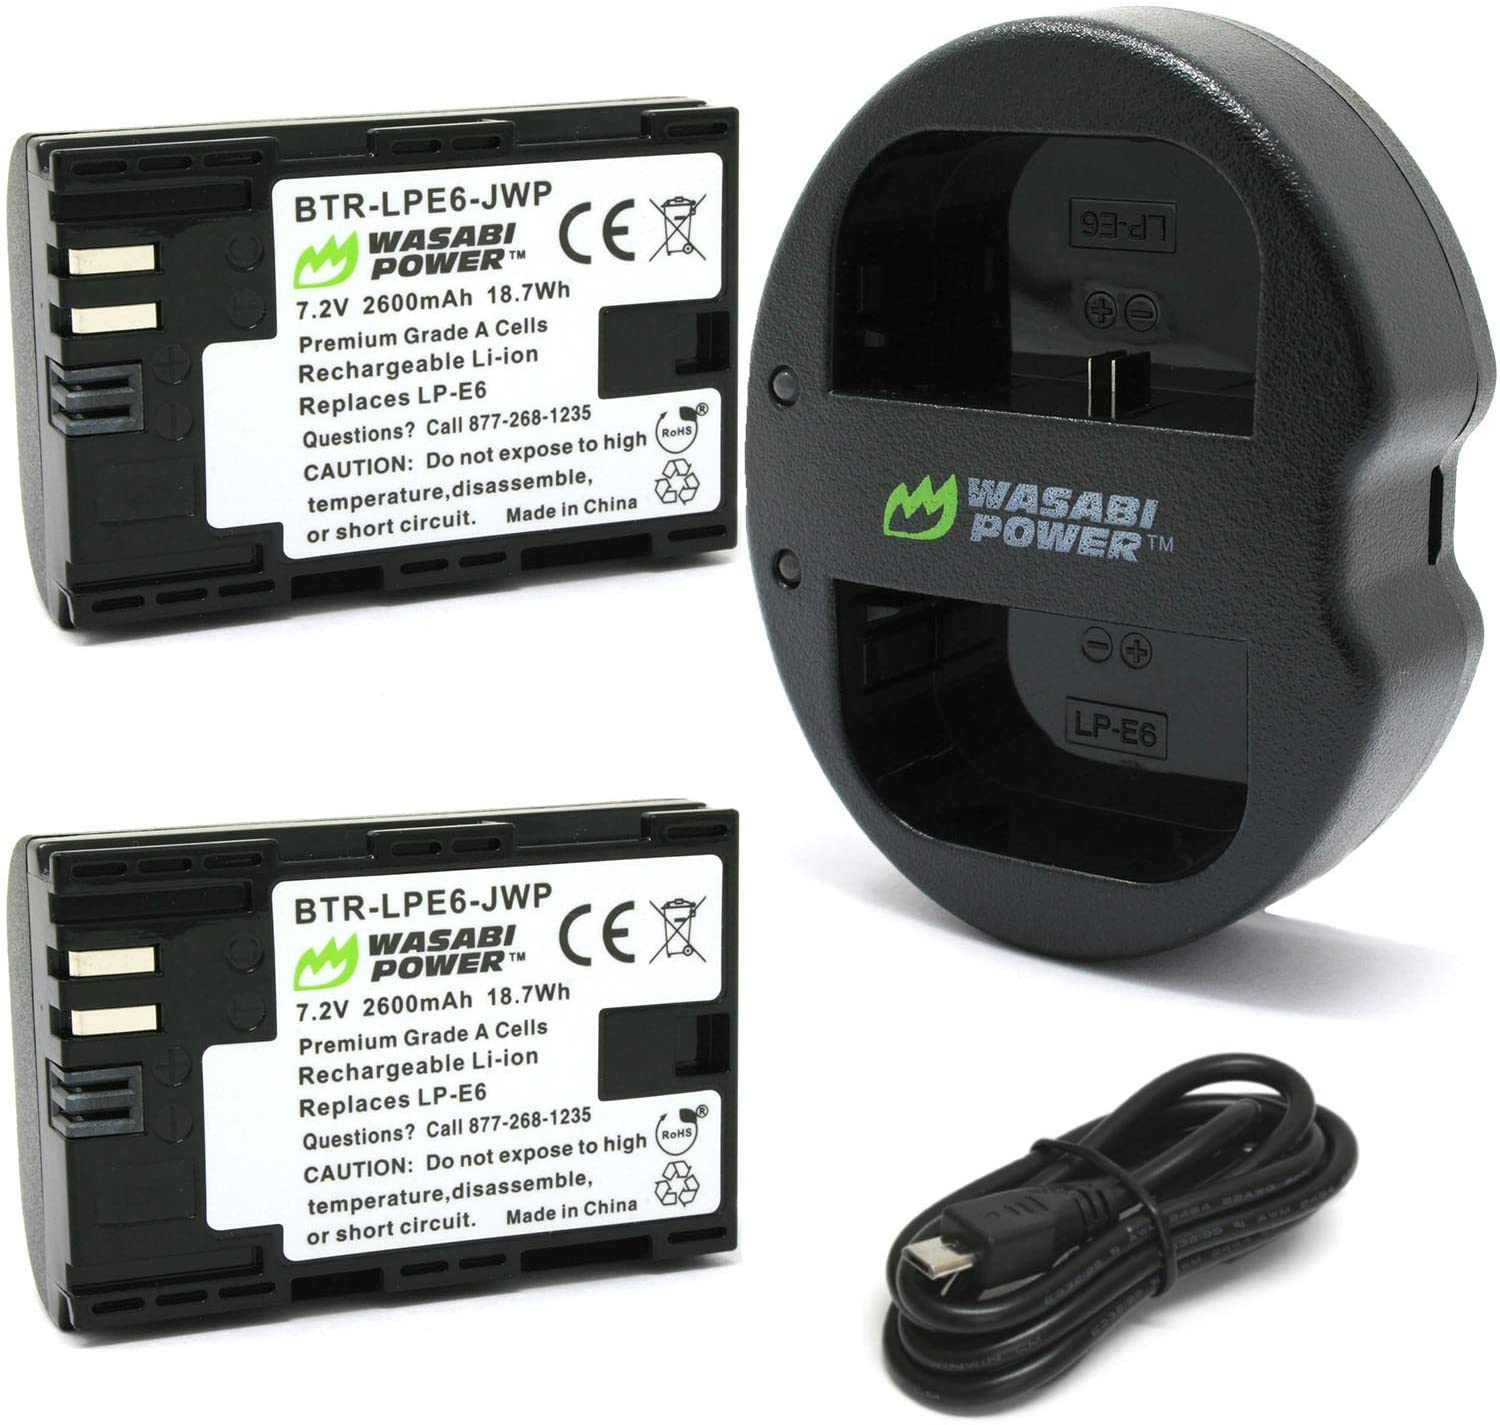 Wasabi Power 2600mAh Battery x 2 + Dual USB Charger for Canon LP-E6, LP